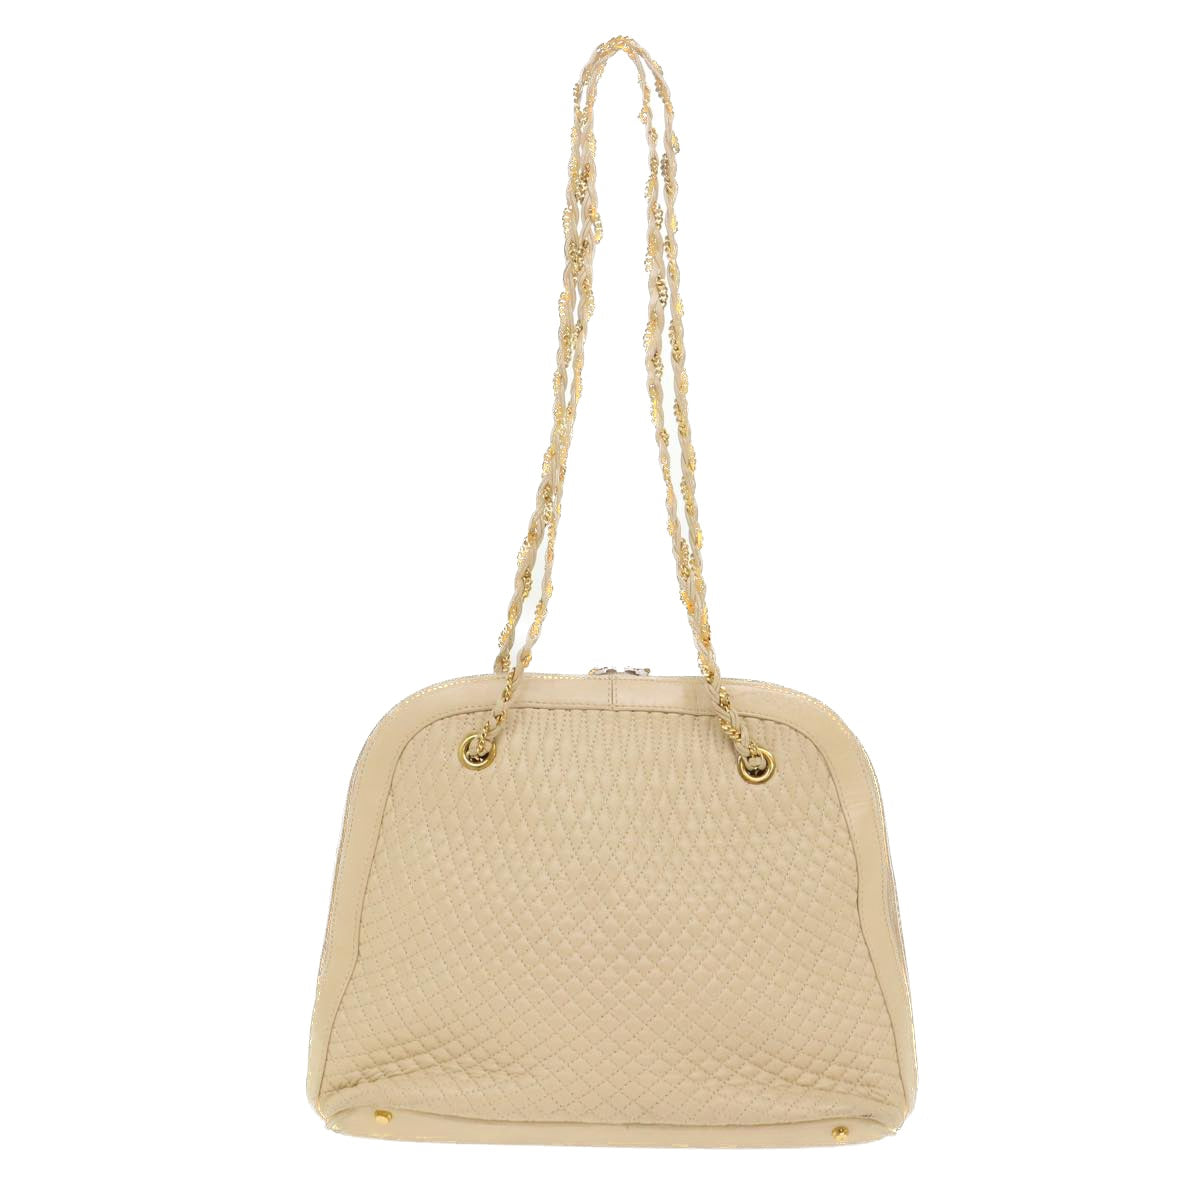 BALLY Chain Shoulder Bag Leather Beige Auth bs6384